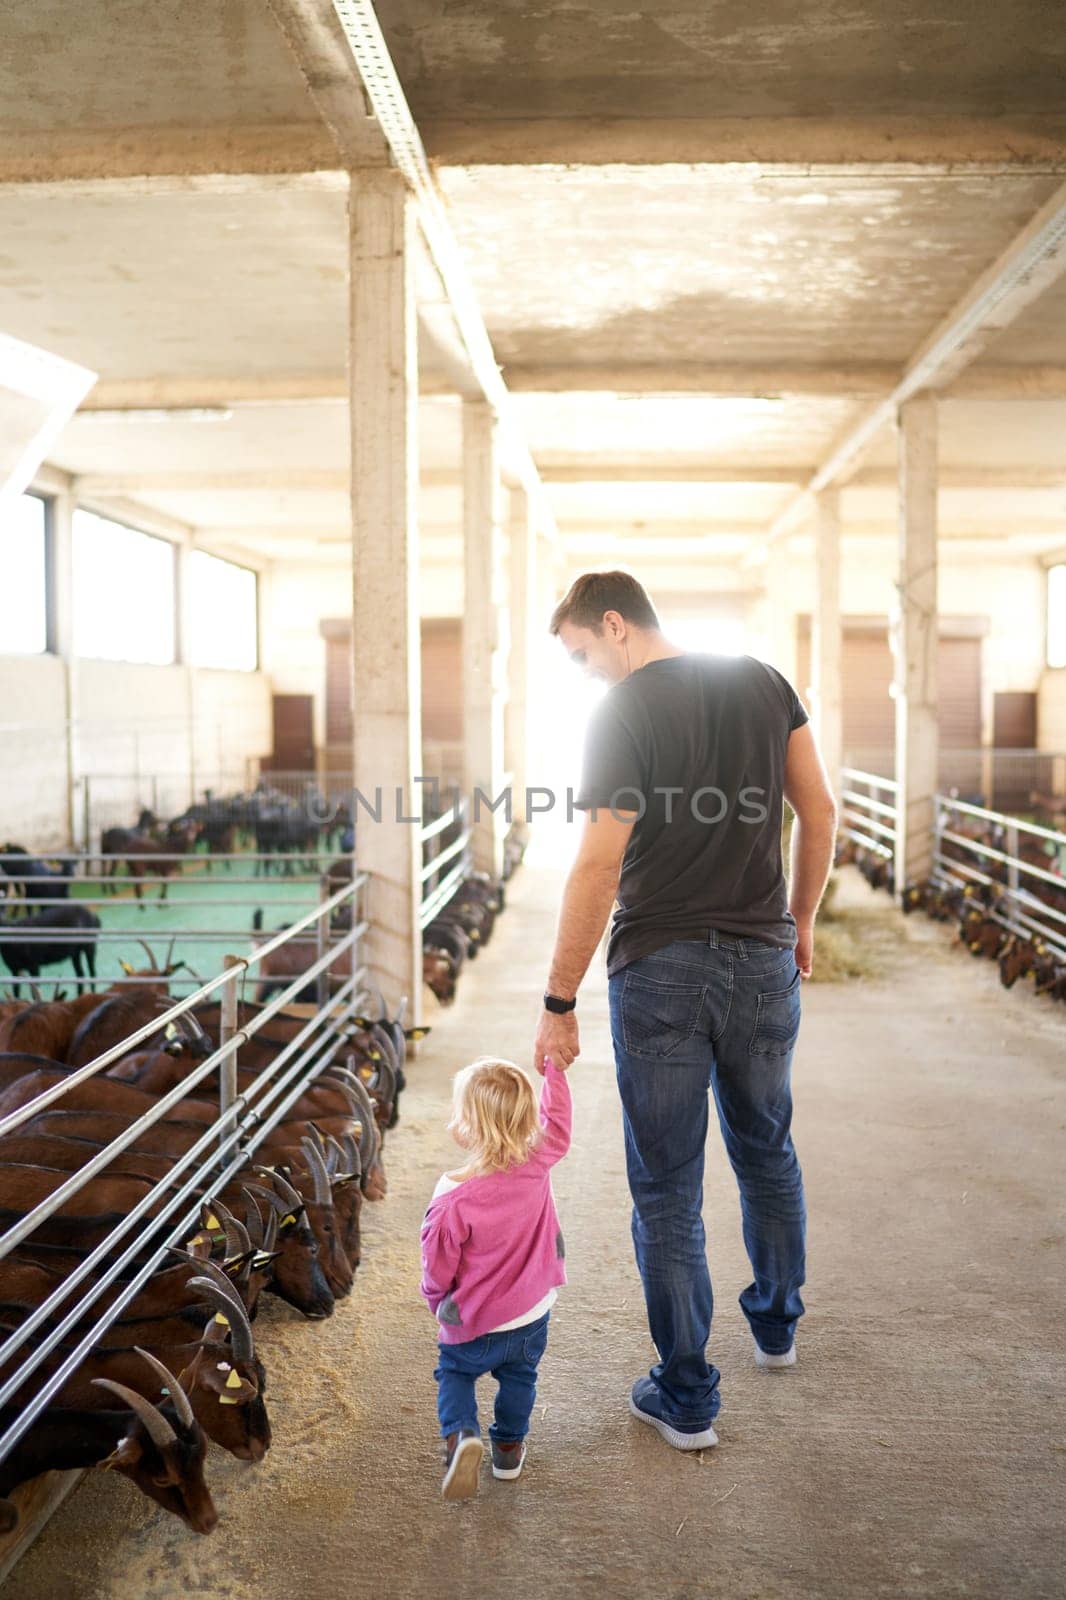 Dad leads the little girl by the hand past the folds of grain-eating goats. Back view by Nadtochiy